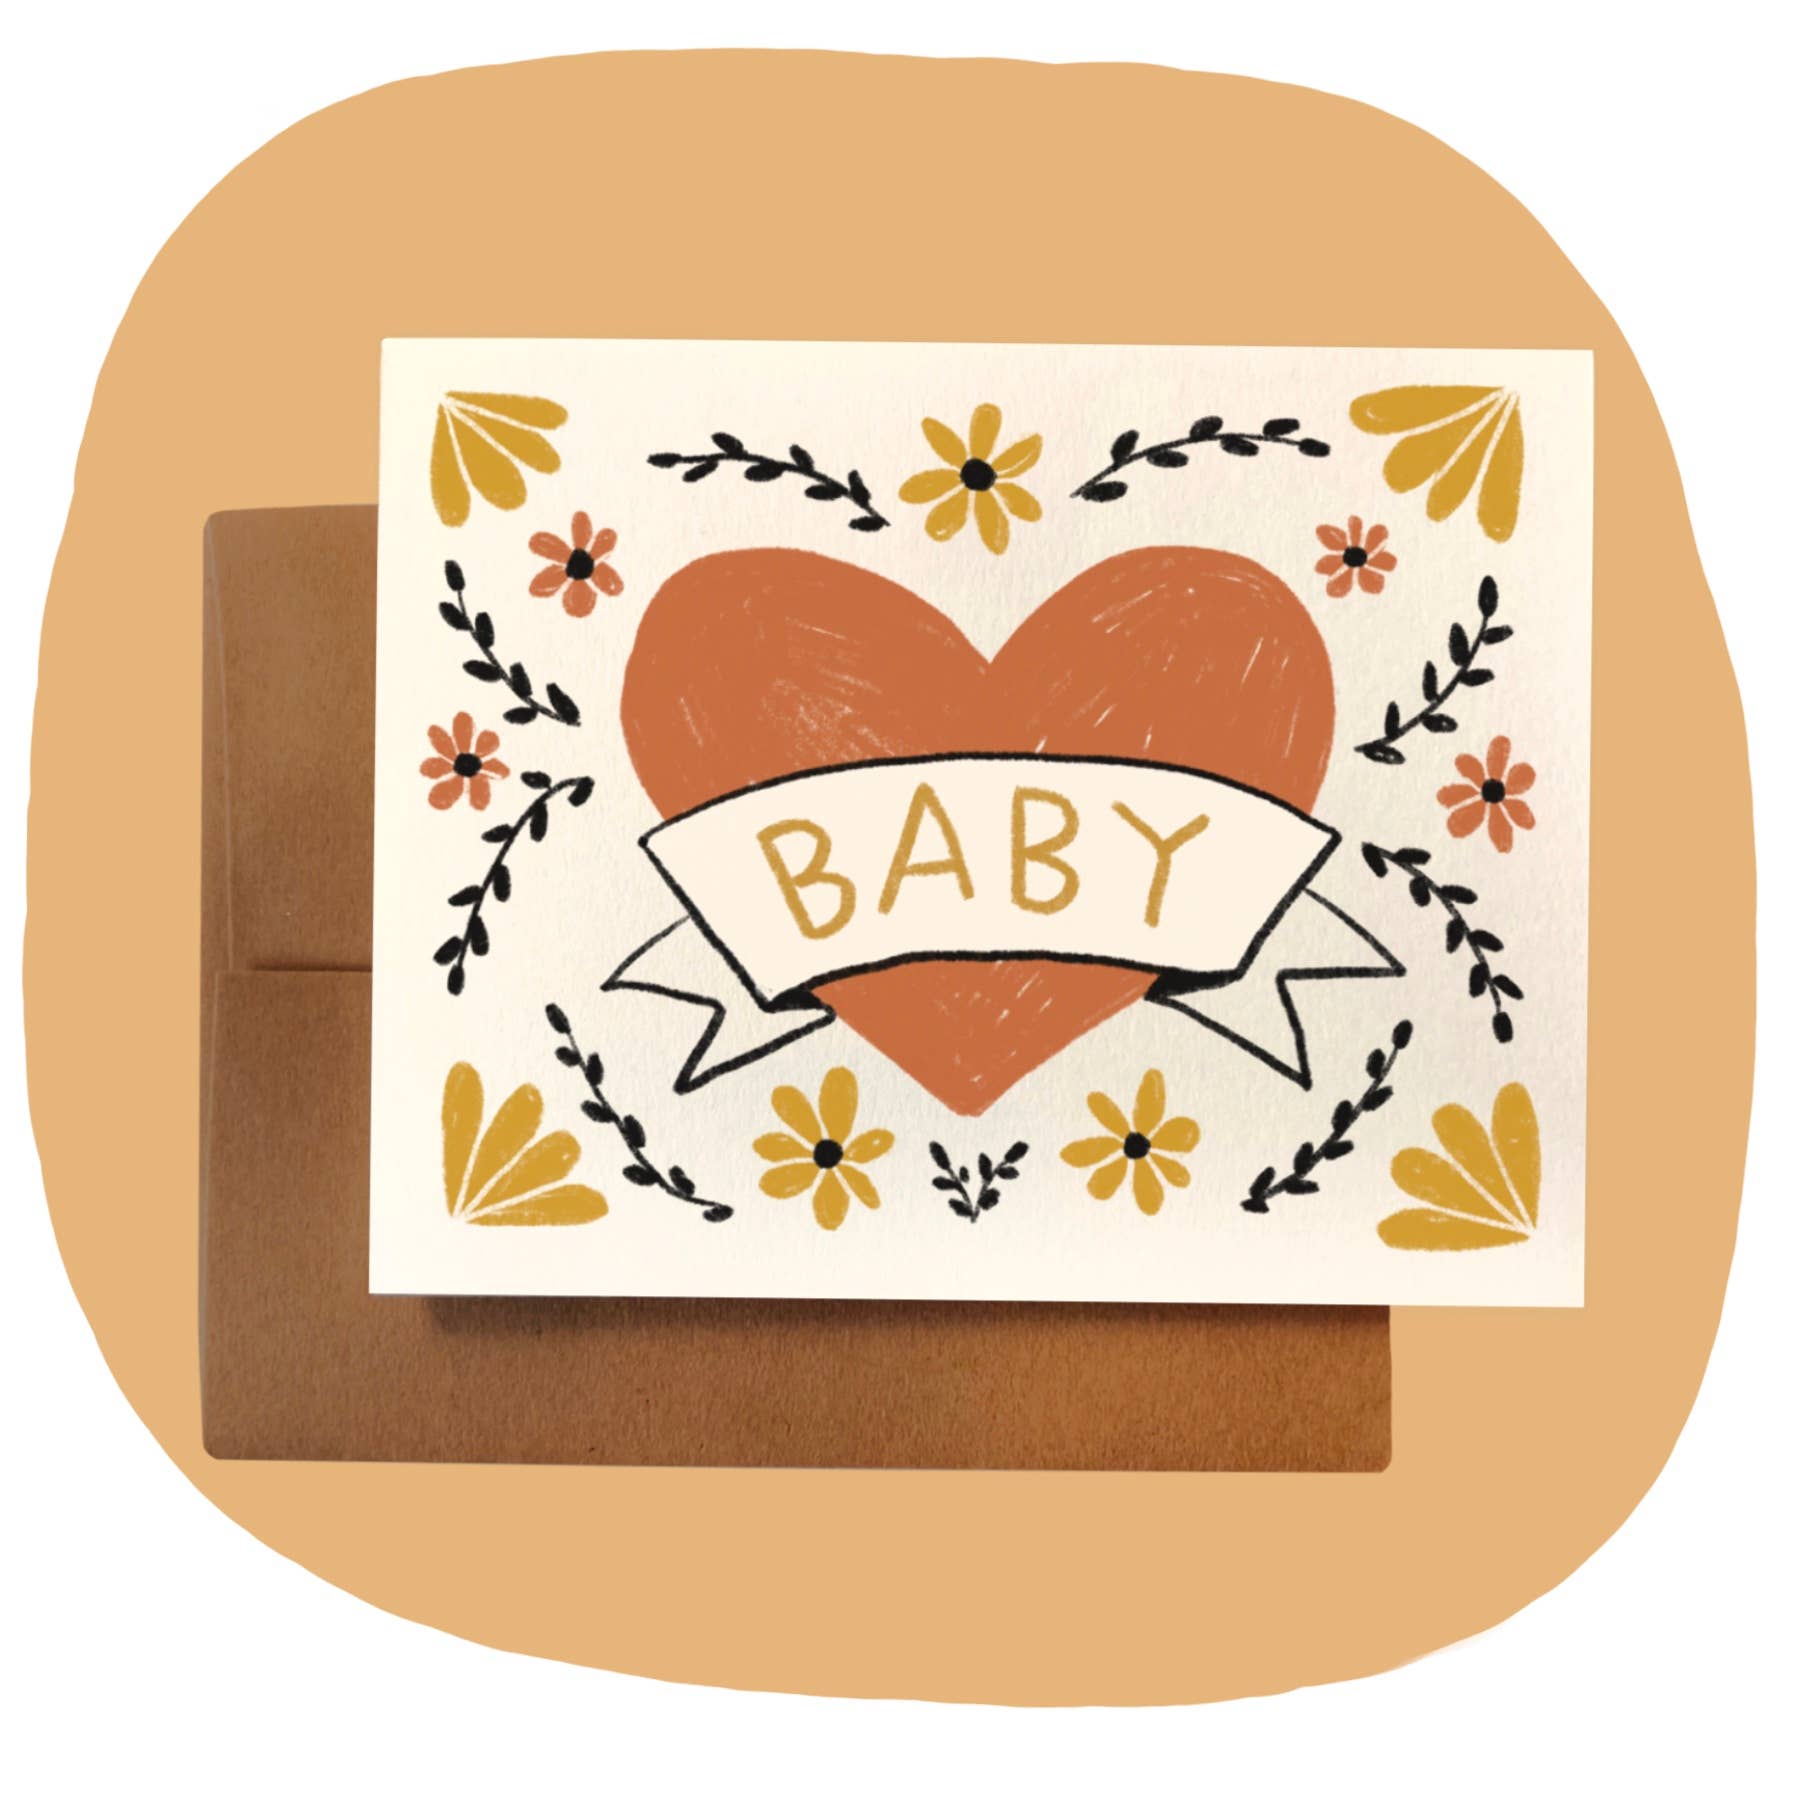 "BABY ~ CLASSIC HEART" Greeting Card